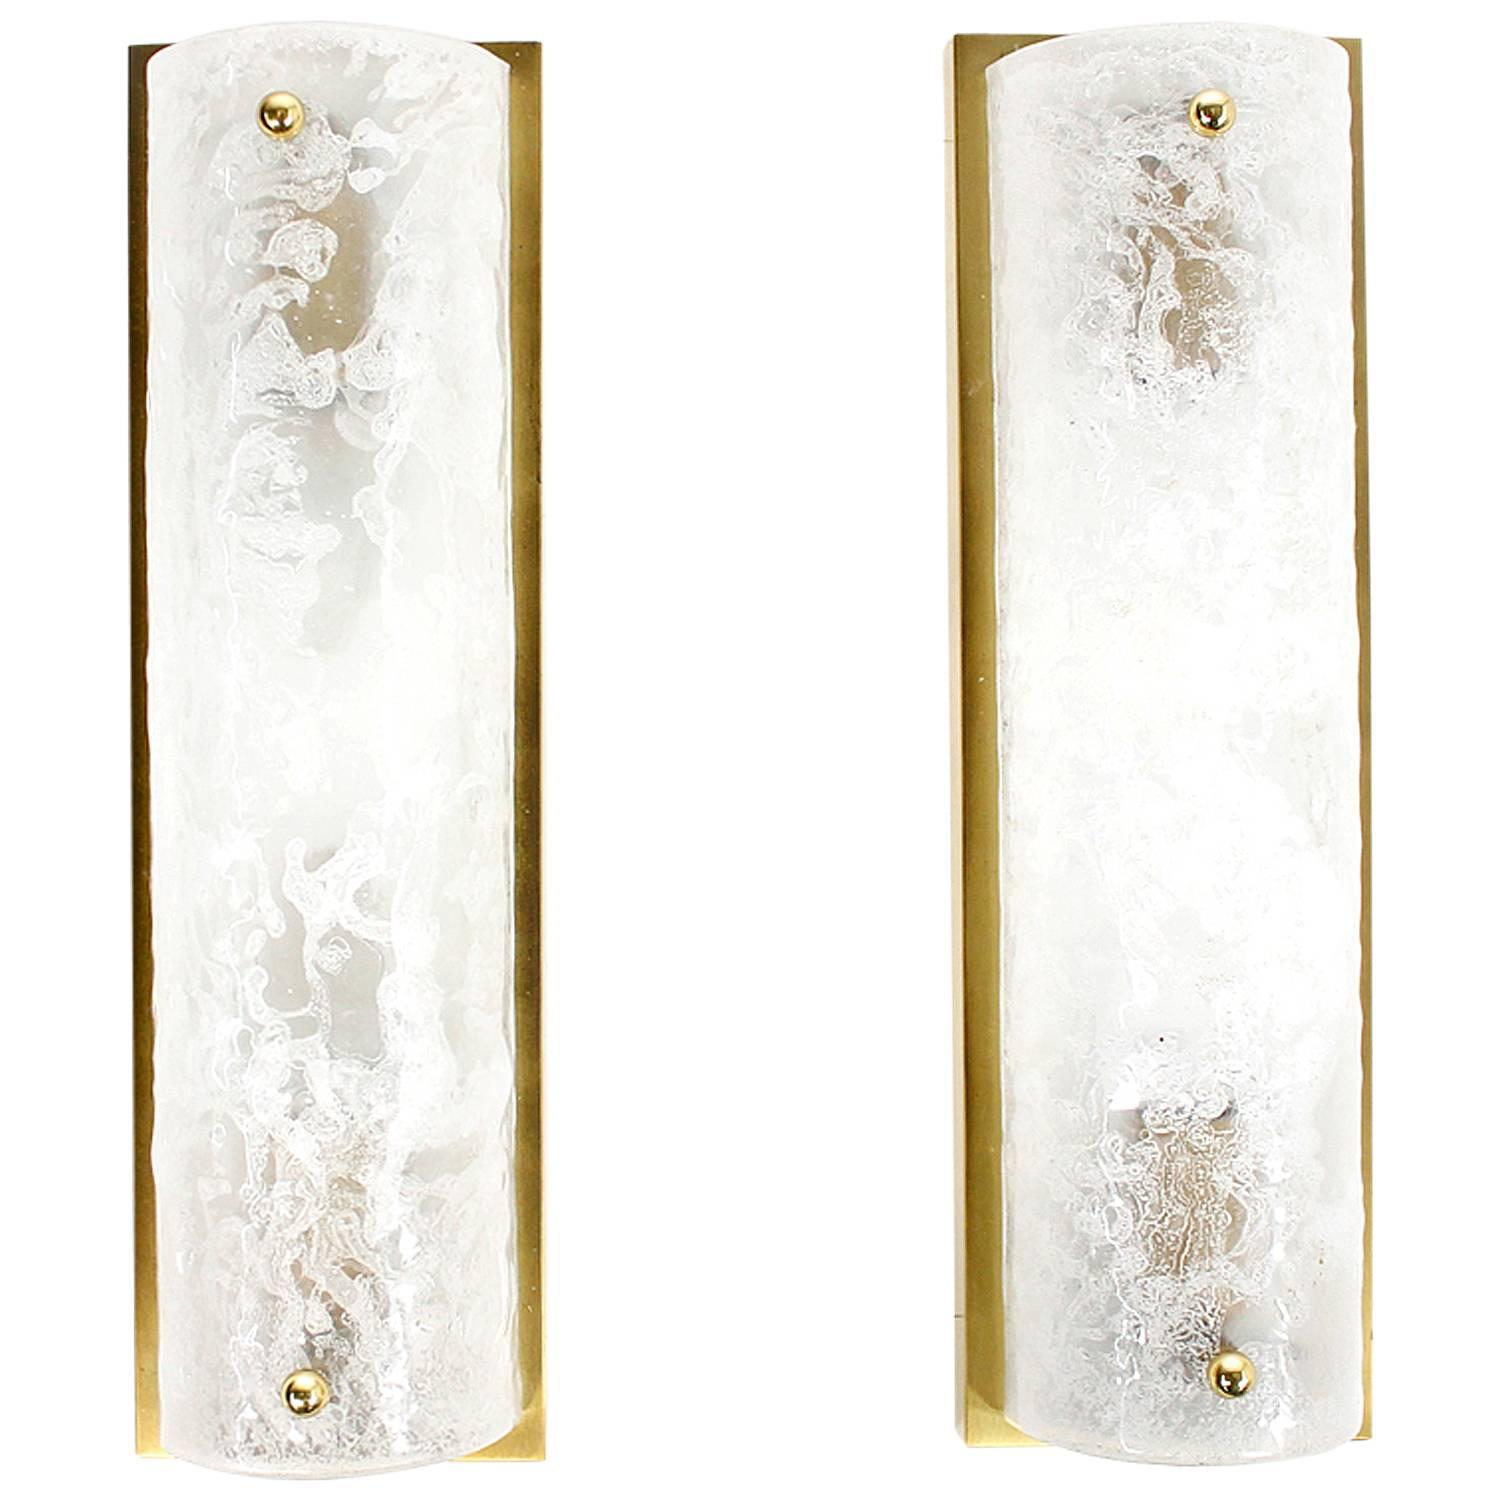 Beautiful Pair of Brass and Glass Vanity Mirror Sconces by Hillebrand 1960s